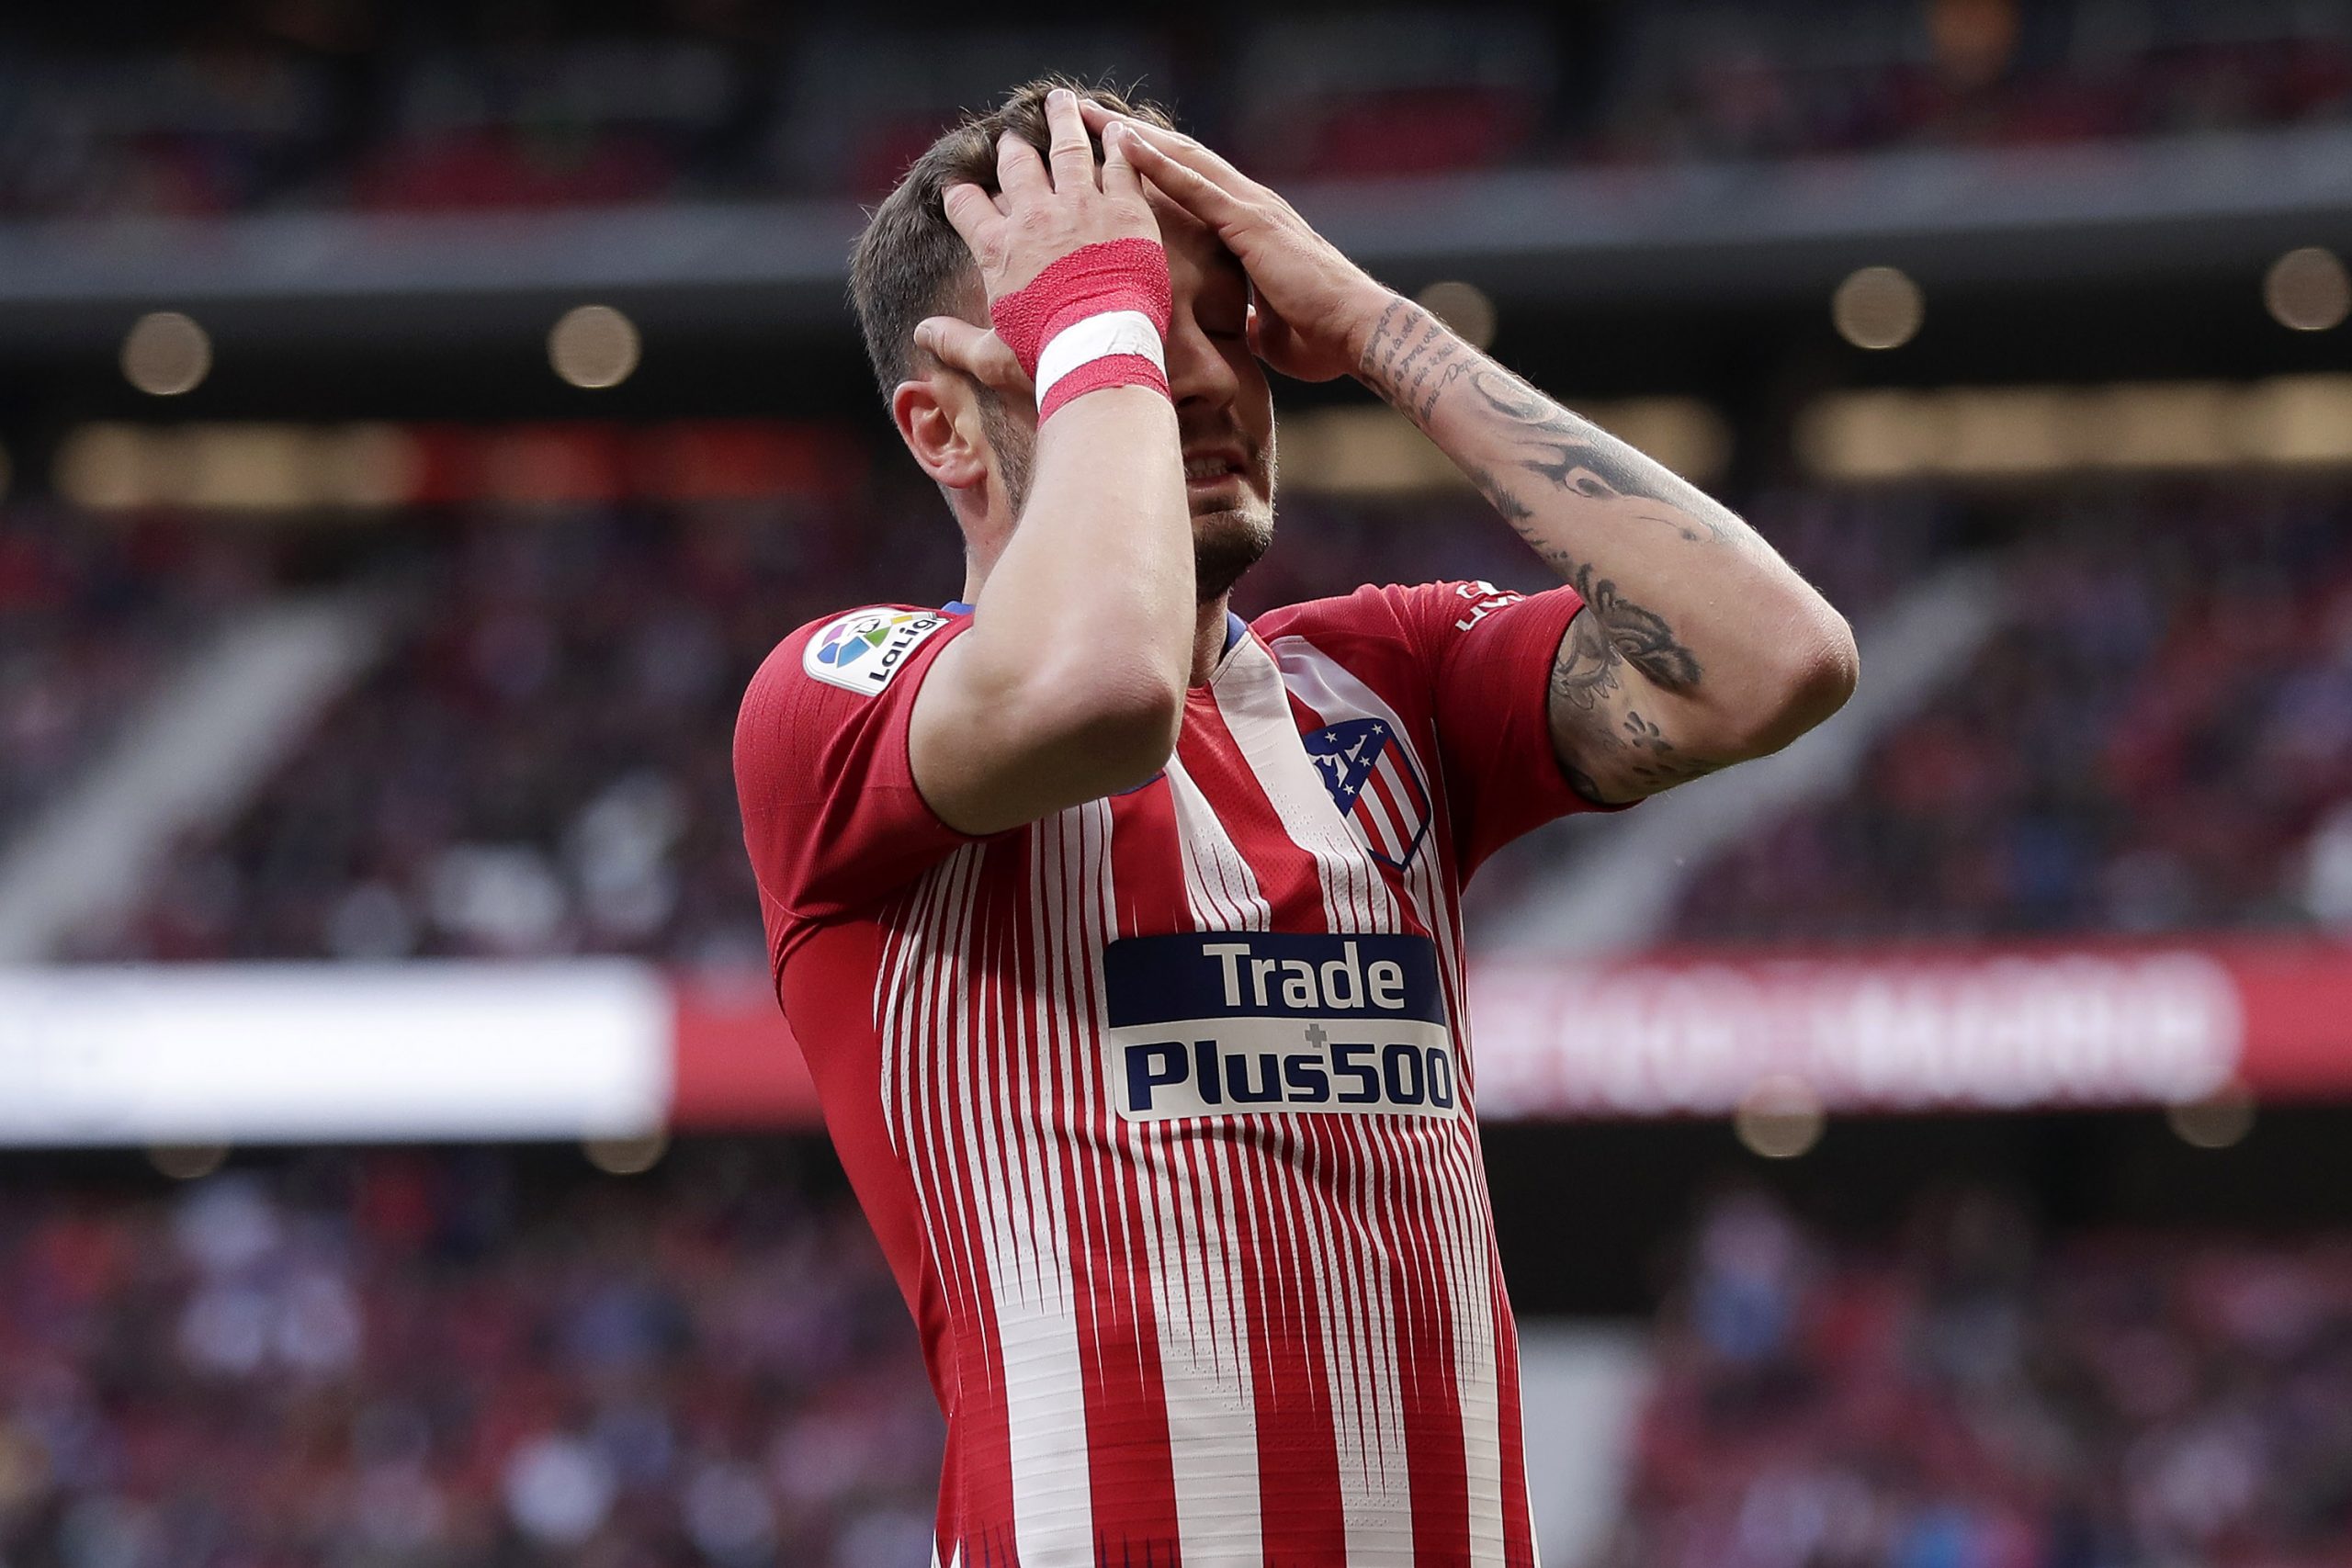 Saul Niguez of Atletico Madrid reatcs during the La Liga match between  Club Atletico de Madrid and Girona FC at Wanda Metropolitano on April 02, 2019 in Madrid, Spain. (Photo by Gonzalo Arroyo Moreno/Getty Images)